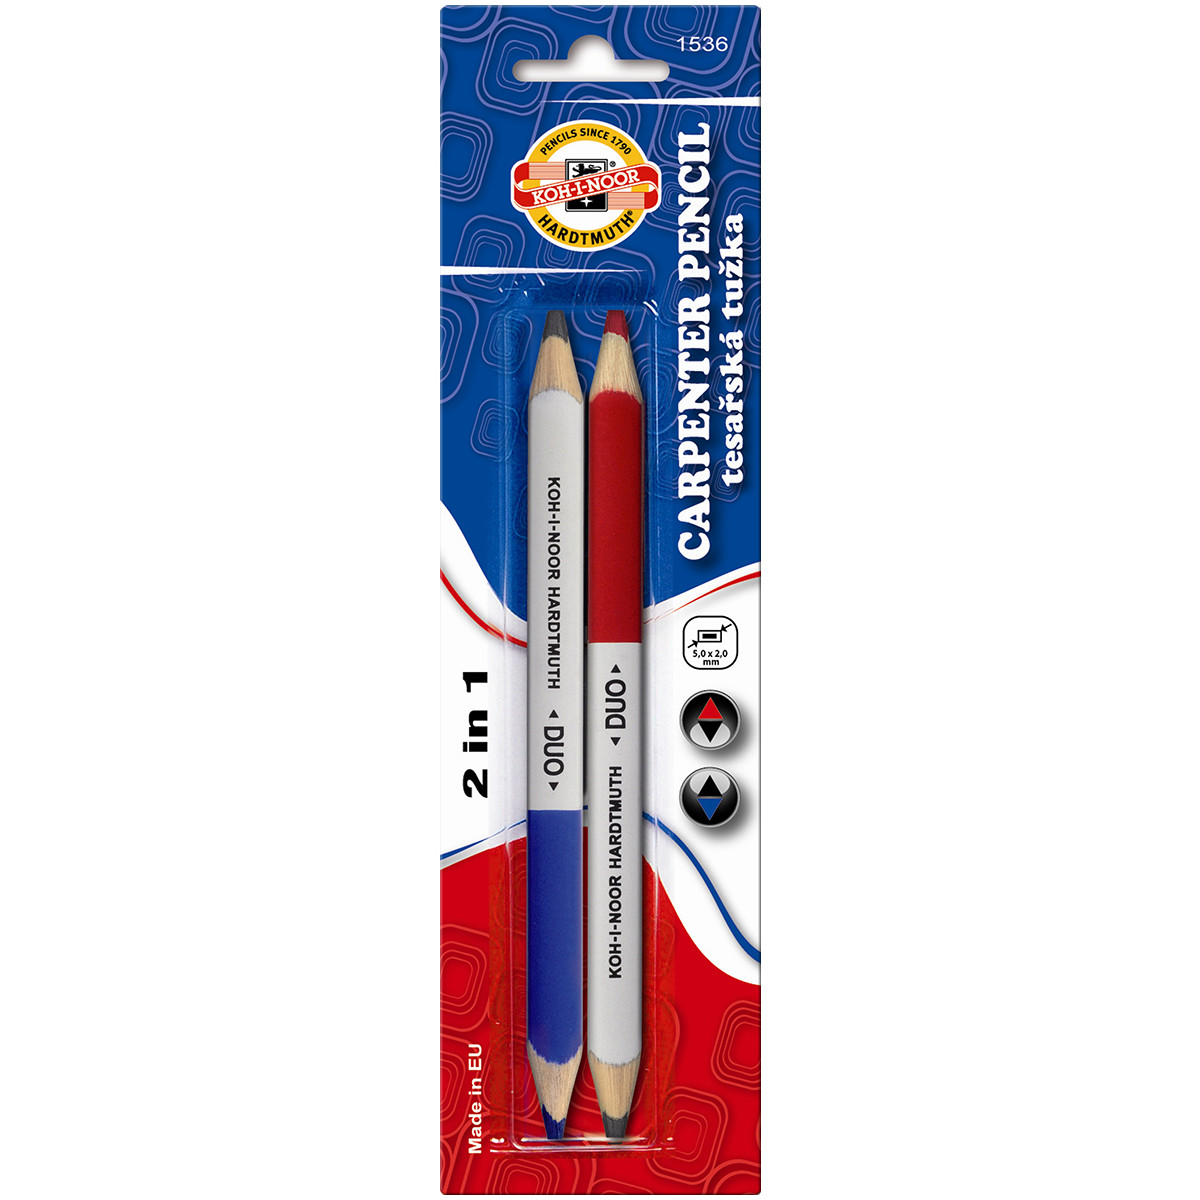 Koh-I-Noor 1536 Duo Carpenter's Pencil - Blue & Red (Pack of 2)